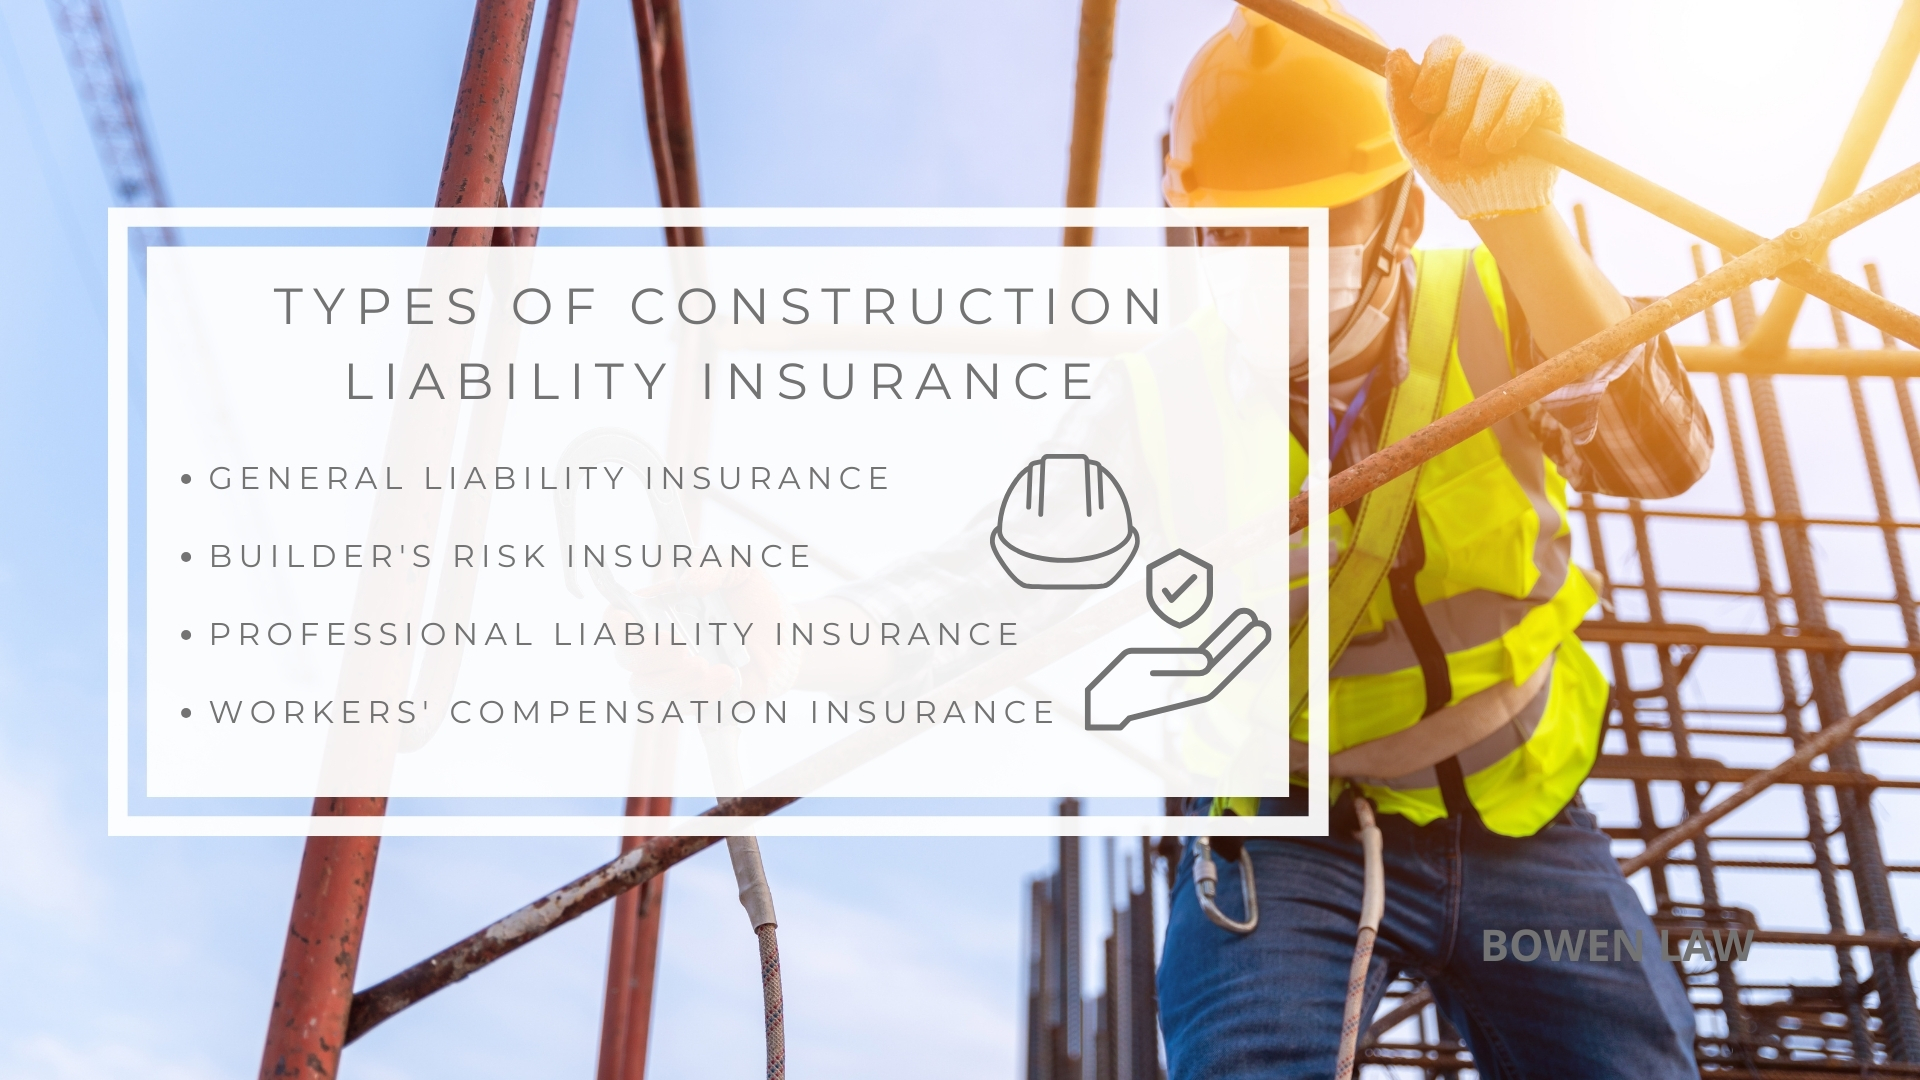 Infographic image of types of construction liability insurance